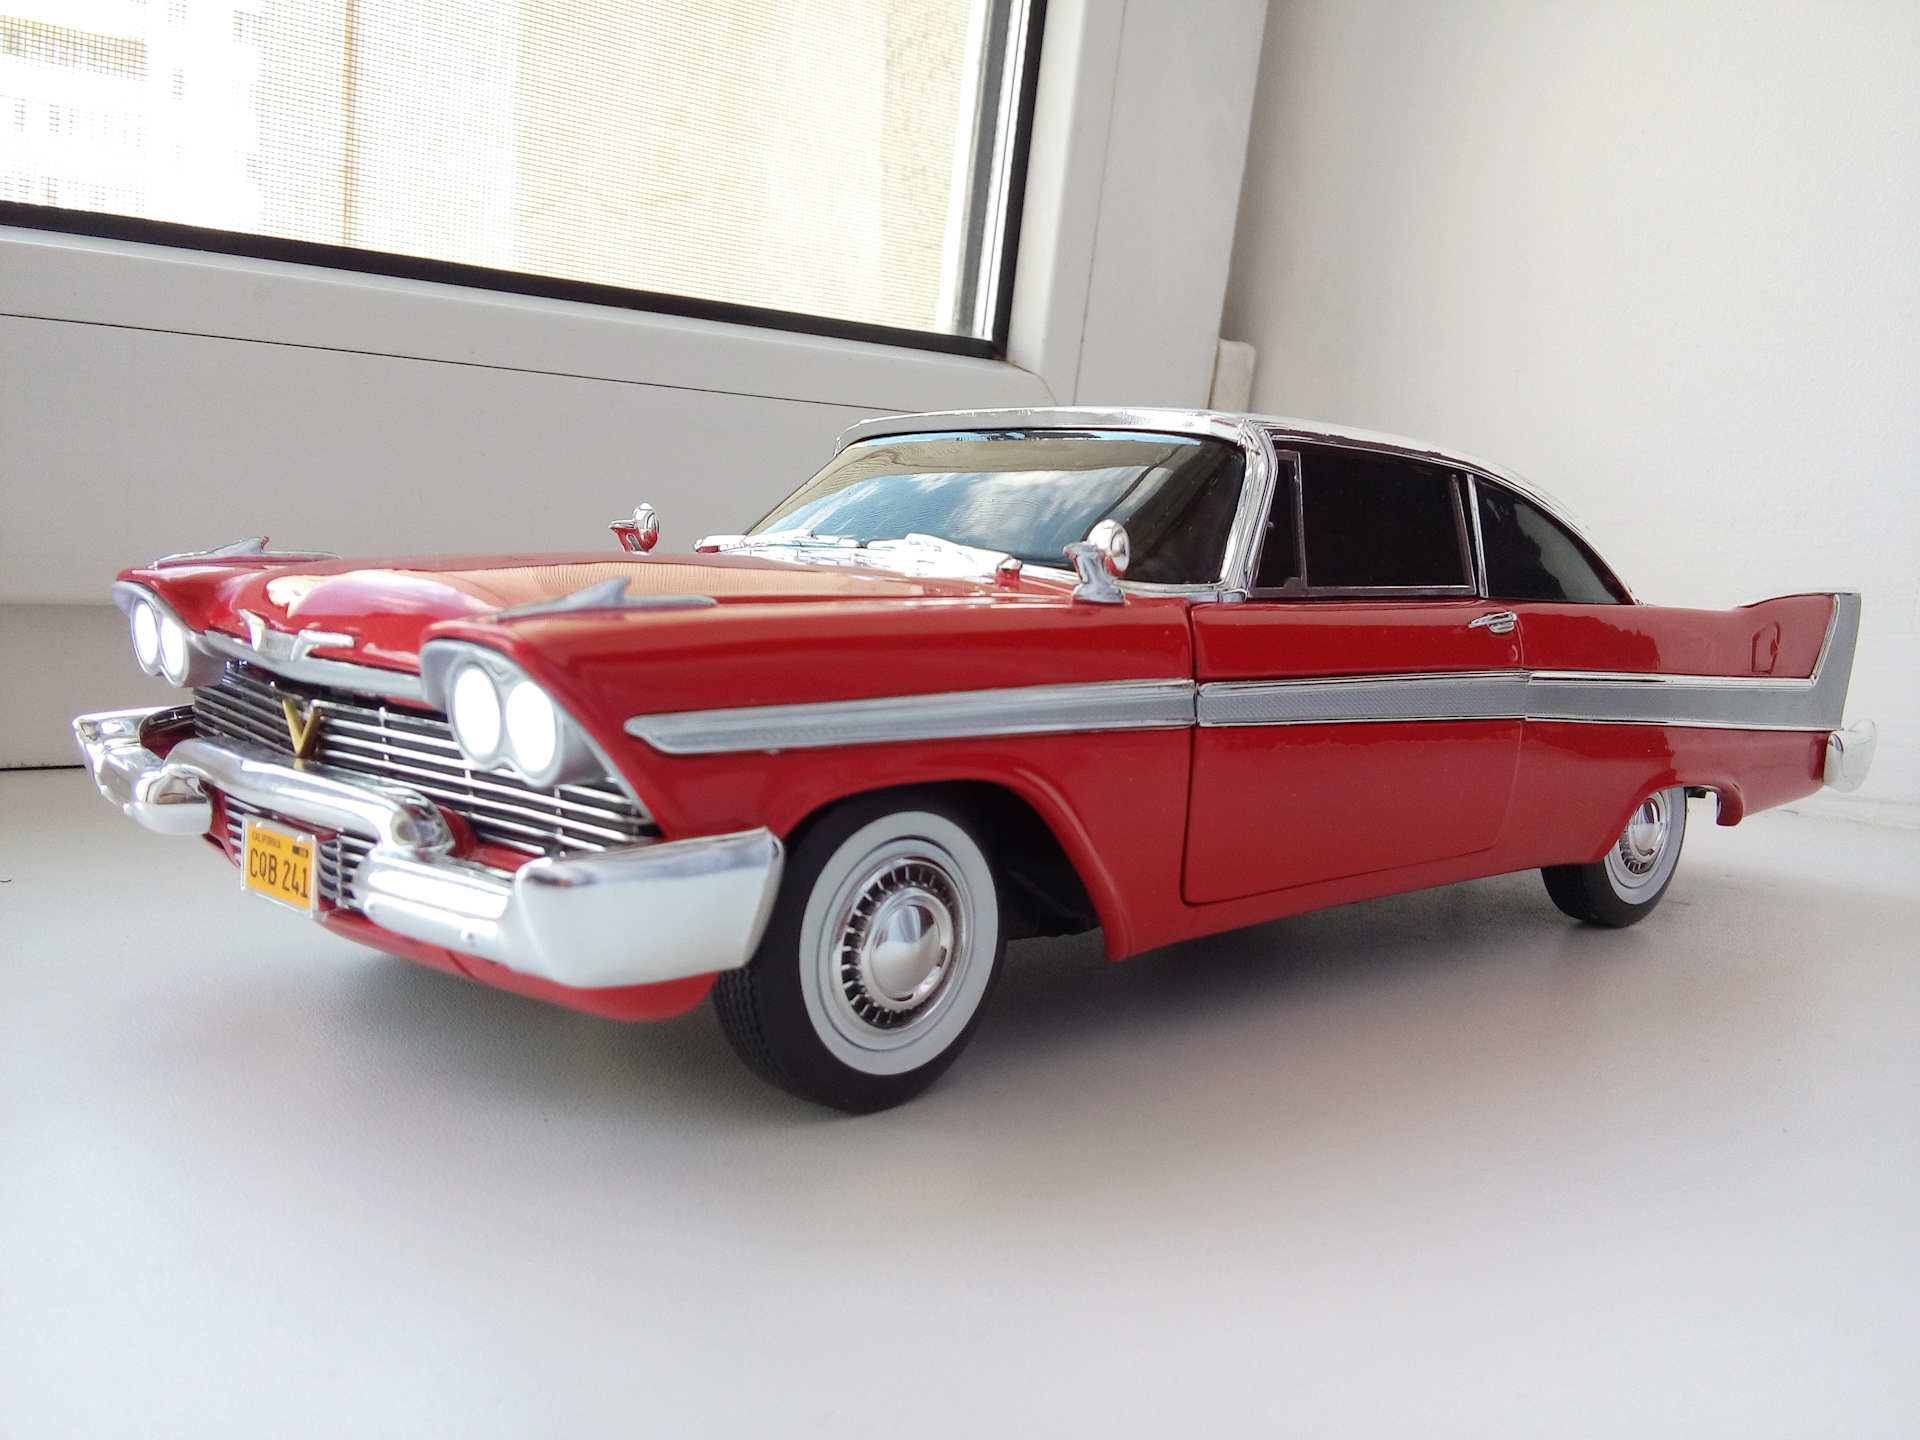 Page 1 18. Plymouth Fury 1958 Motor Max. Plymouth Fury 1958 Christine. Plymouth Fury Christine Autoworld.